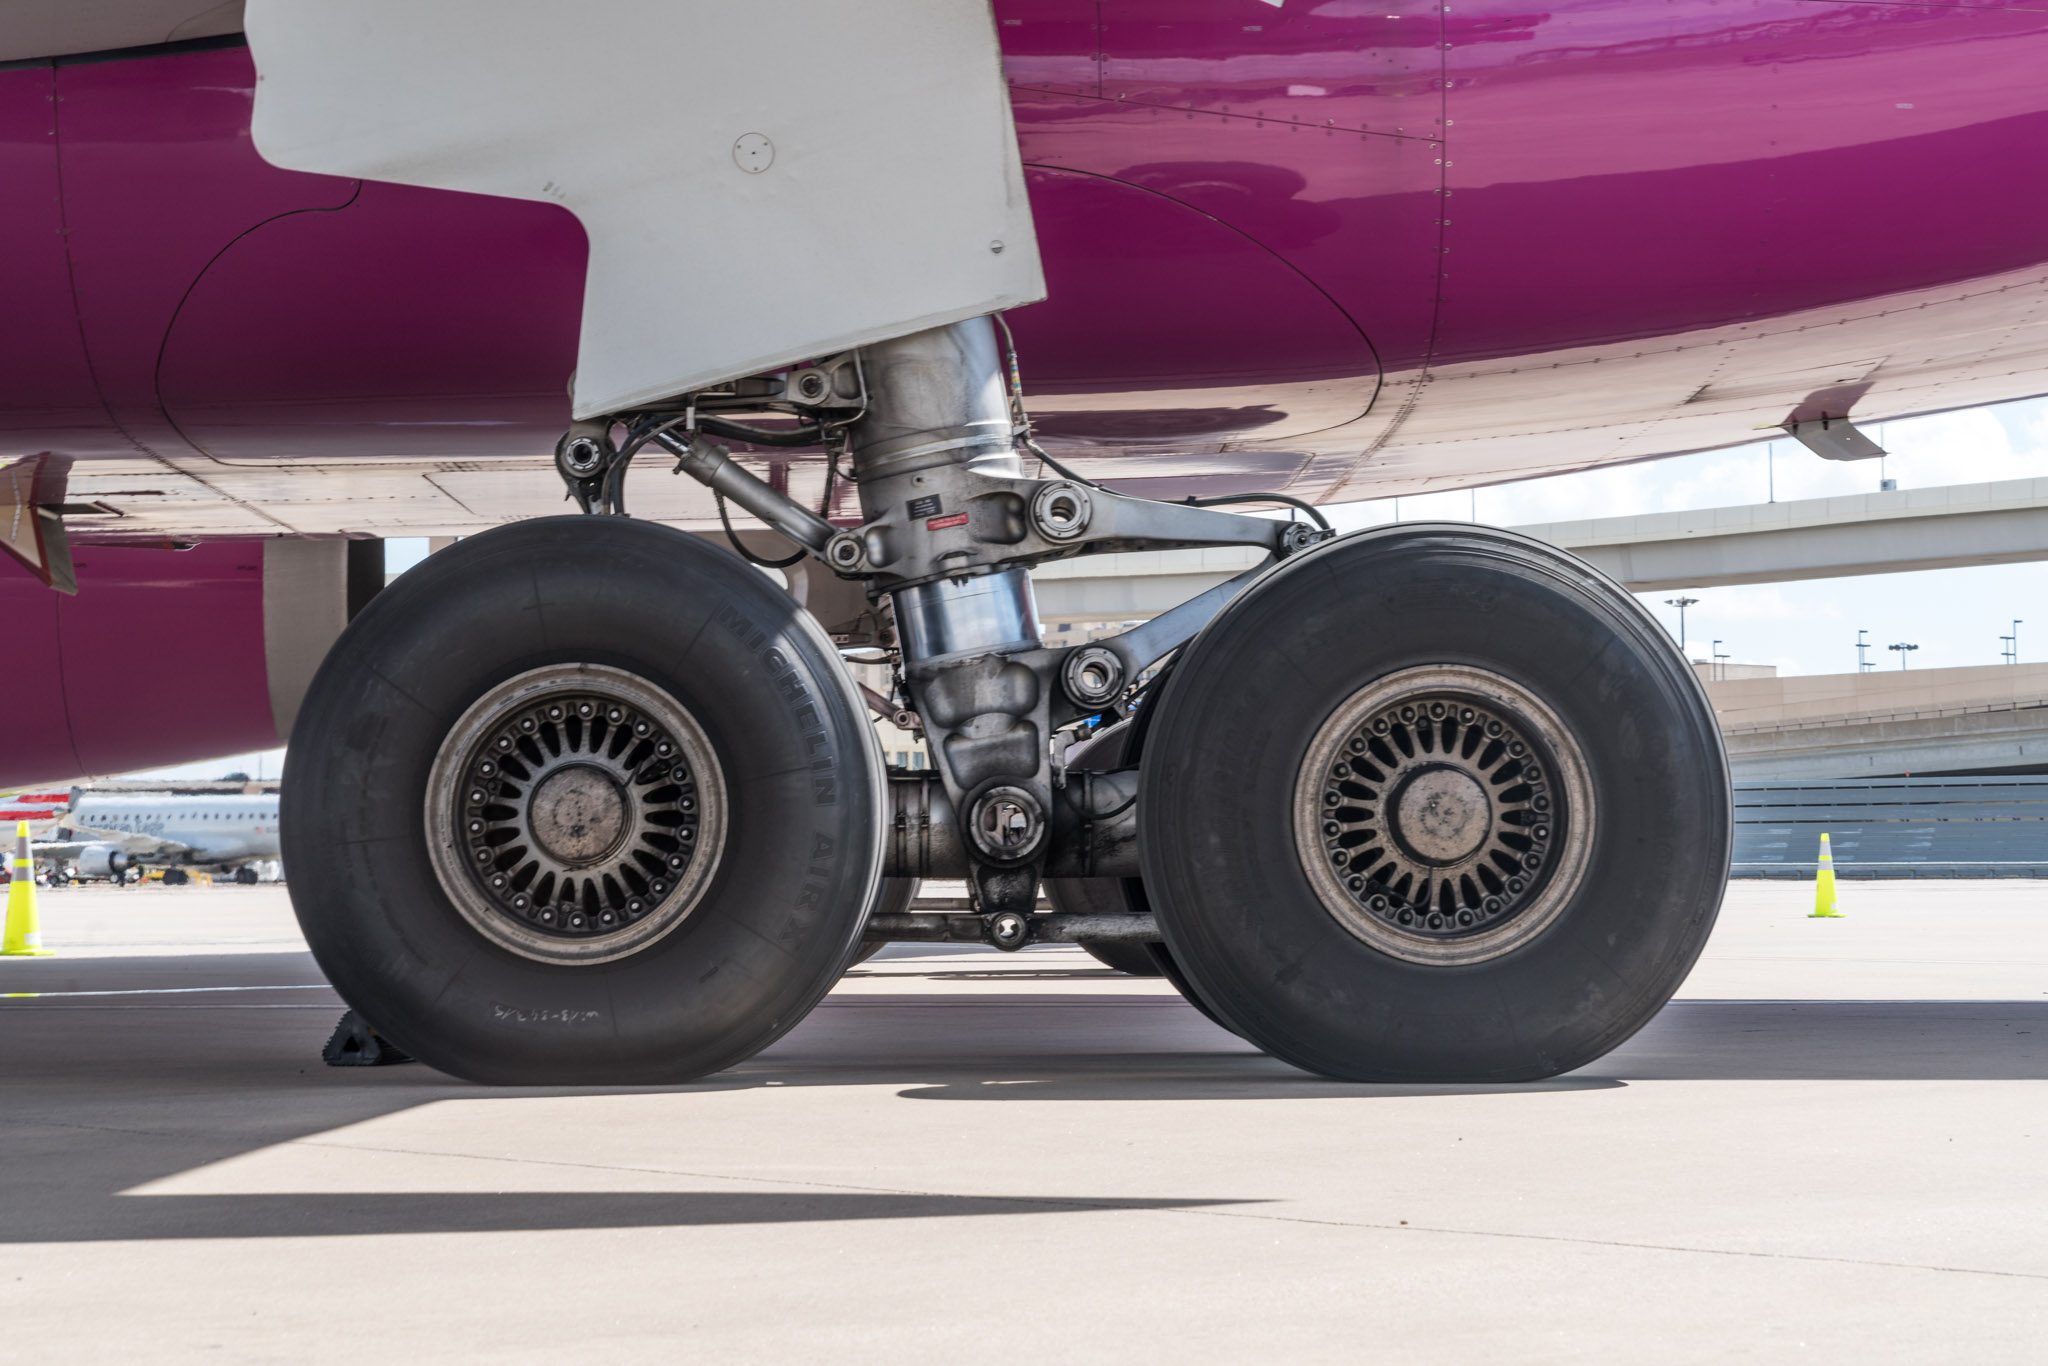 the wheels of a plane